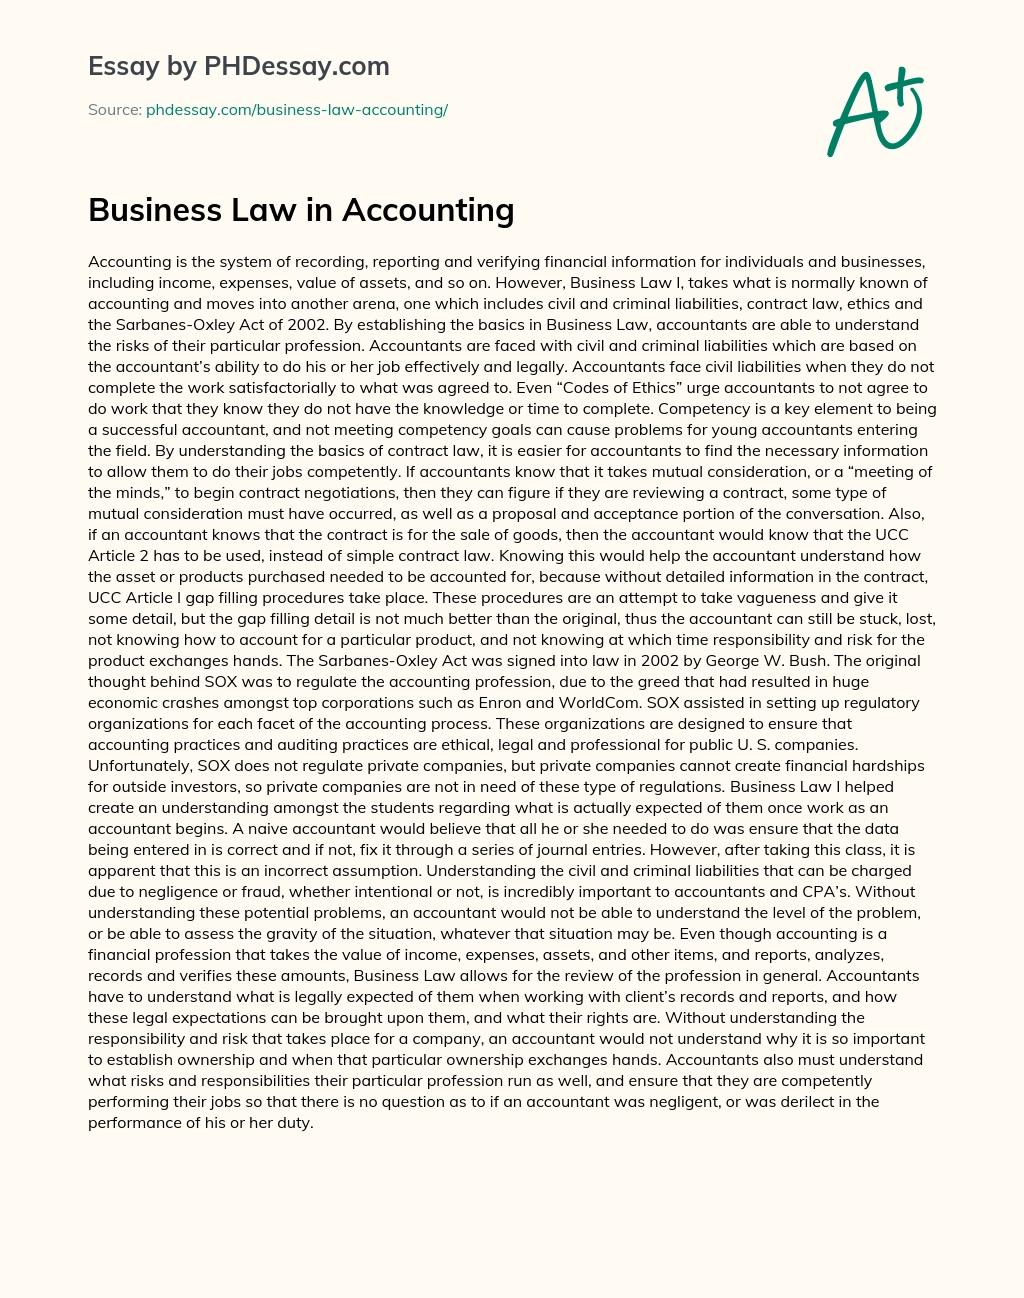 Business Law in Accounting essay